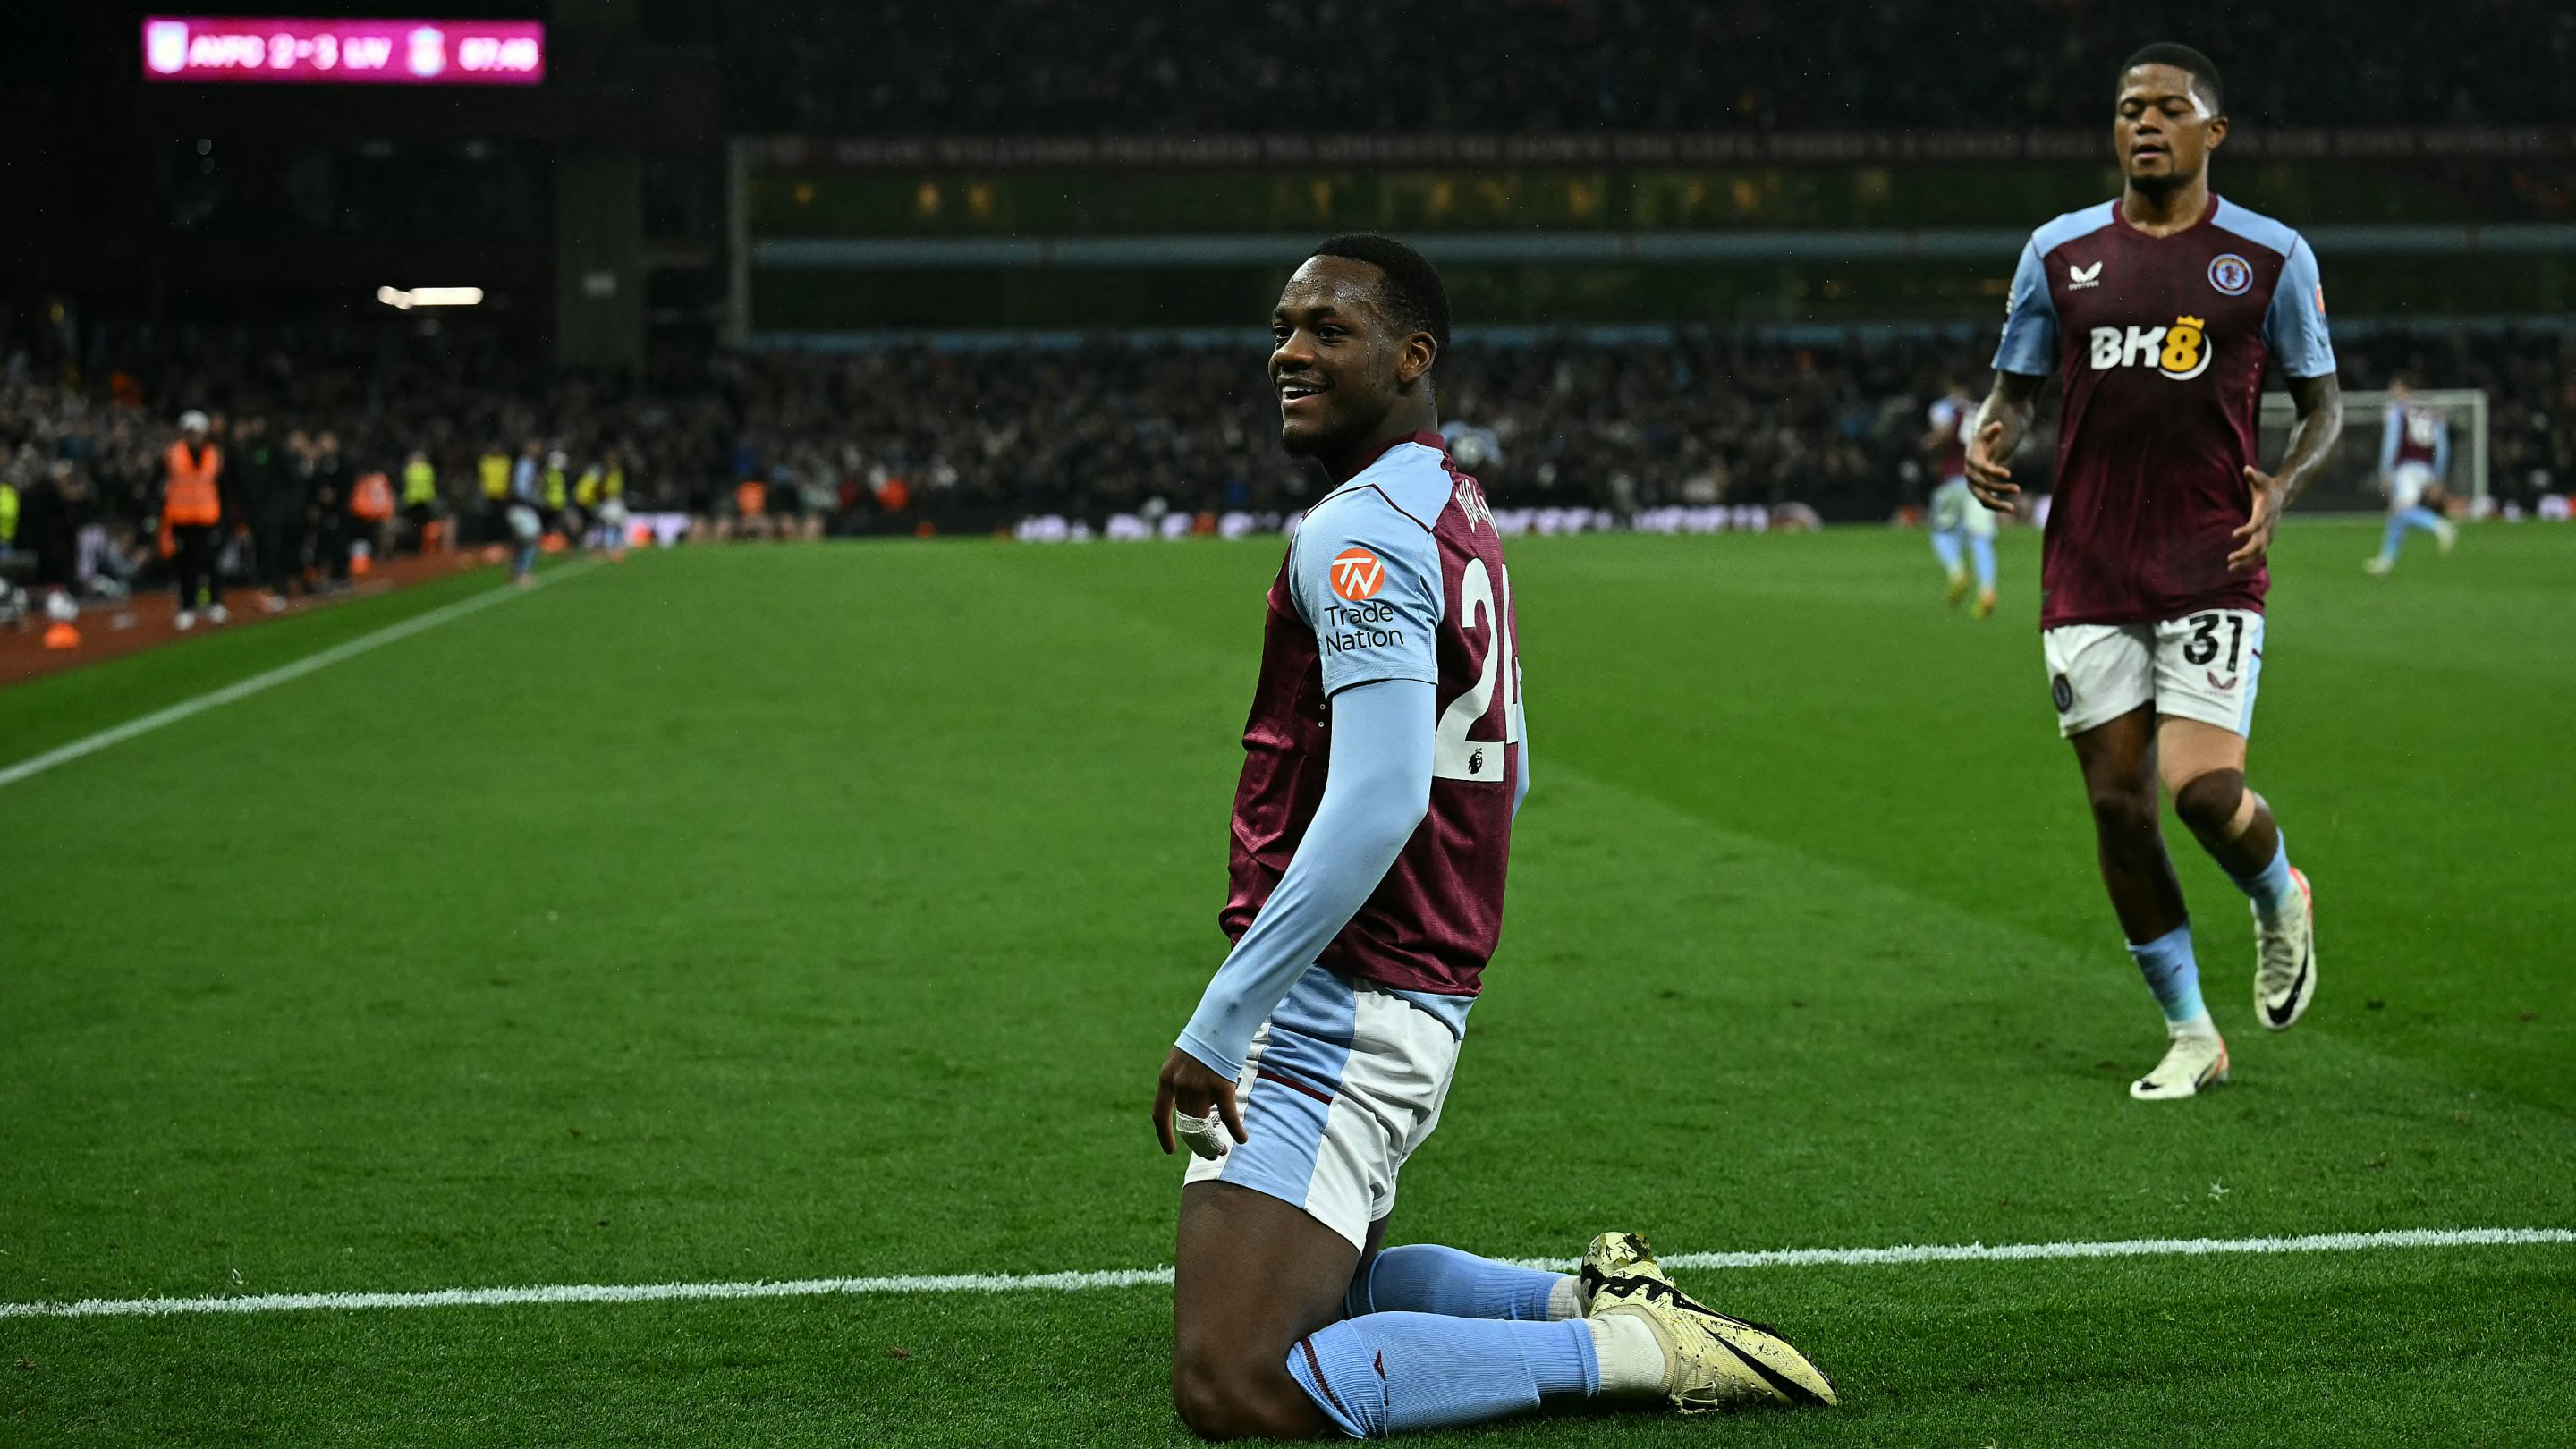 Aston Villa 3-3 Liverpool: Player ratings as late show earns Villans crucial point